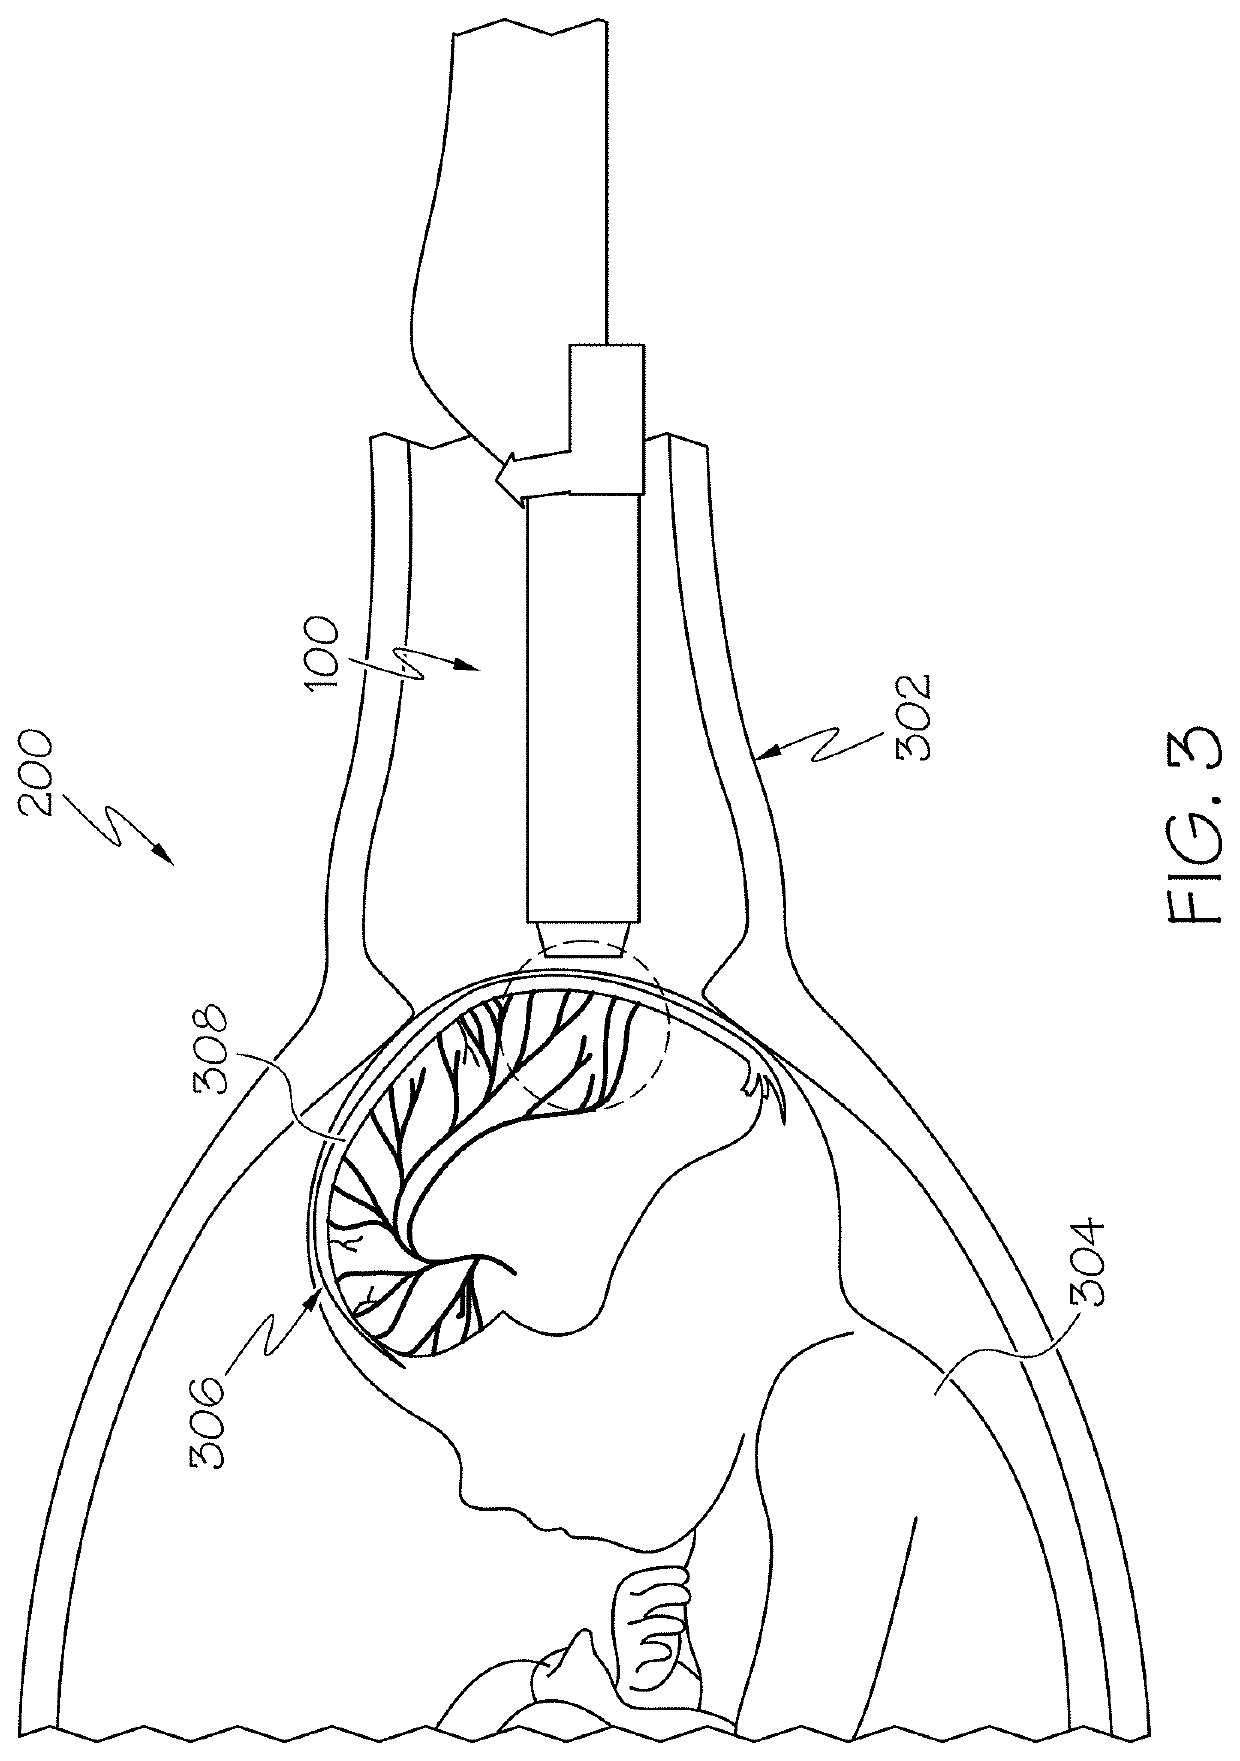 Ultrasound and photoacoustic systems and methods for fetal brain assessment during delivery